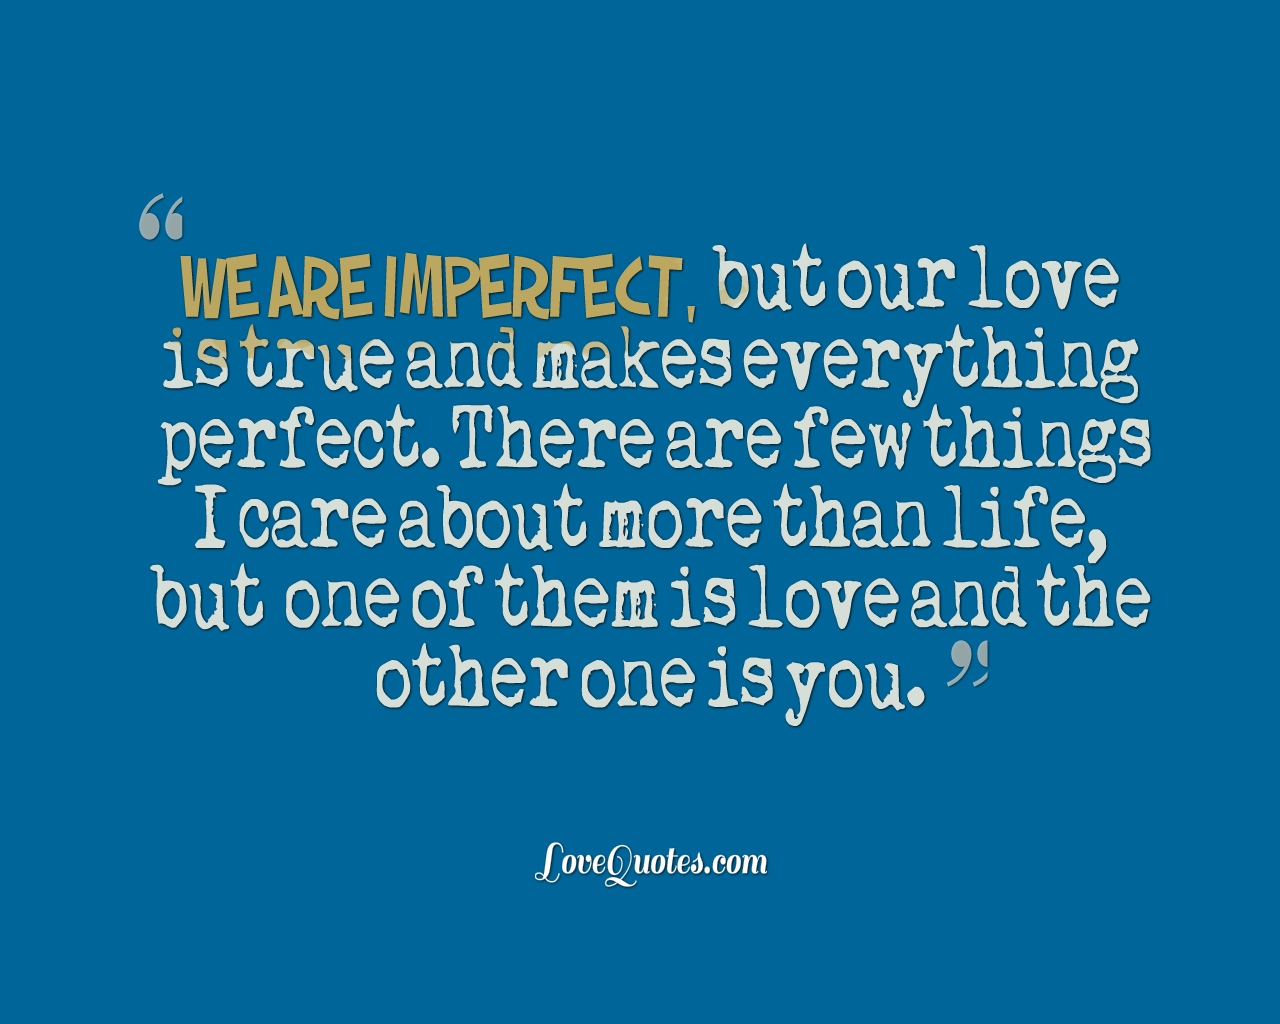 We Are Imperfect - Love Quotes